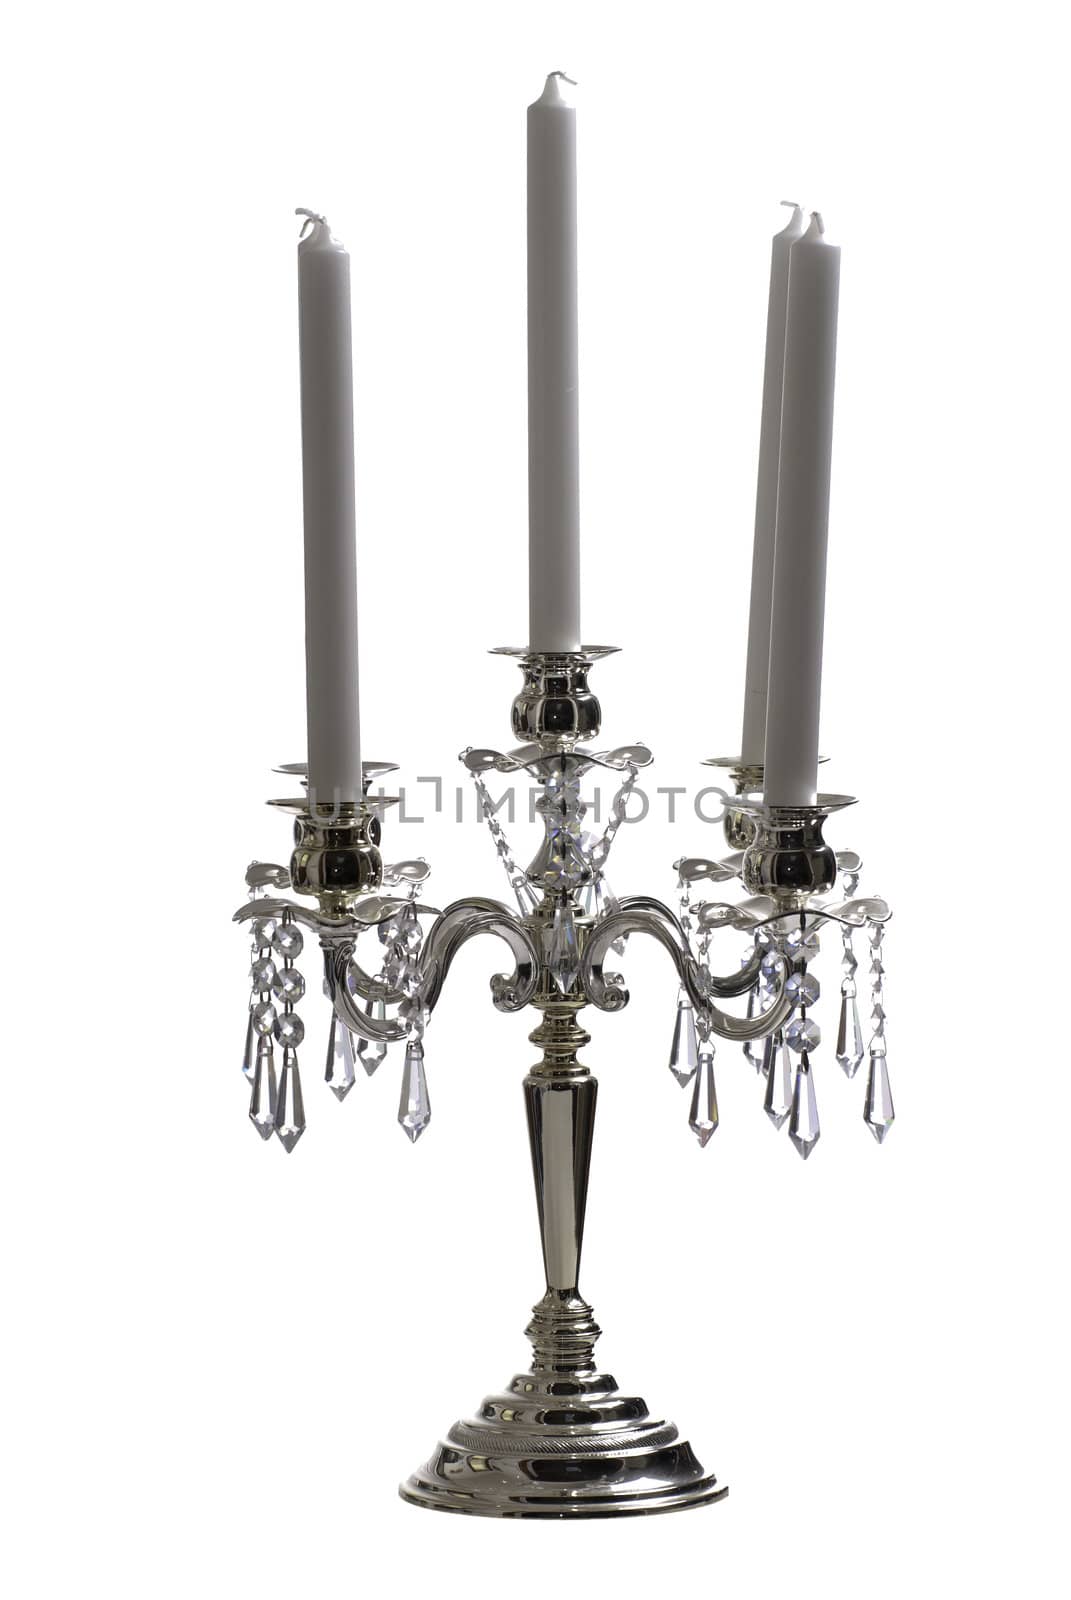 A 5 post candelabra isolated against a white background